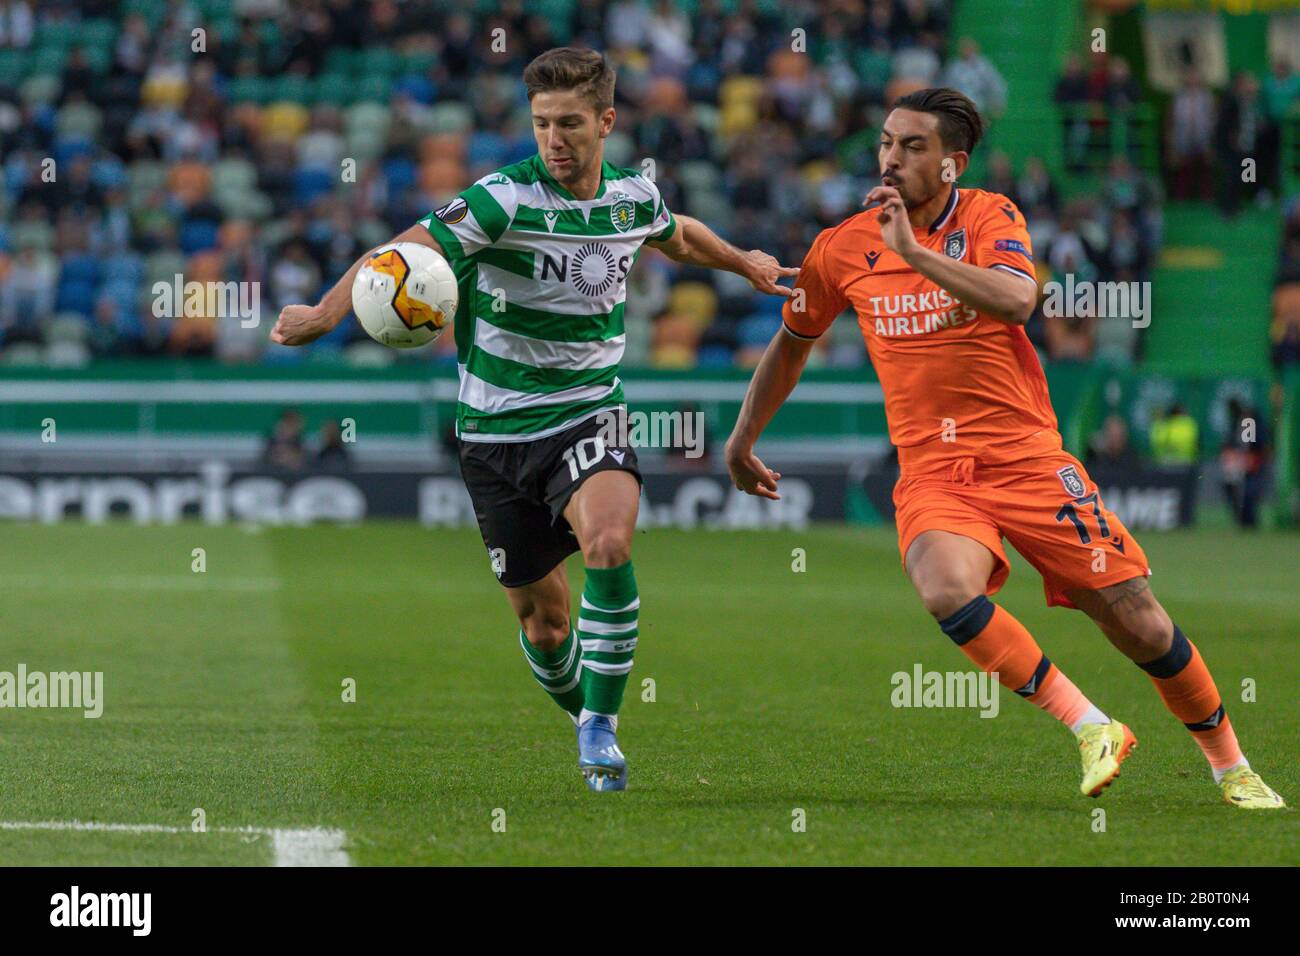 Lisbon, Portugal. 20th Feb, 2020. February 20, 2020. Lisbon, Portugal. Sporting's forward from Argentina Luciano Vietto (10) in action during the game of the UEFA Europa League, Sporting CP vs Istanbul Basaksehir Credit: Alexandre de Sousa/Alamy Live News Stock Photo